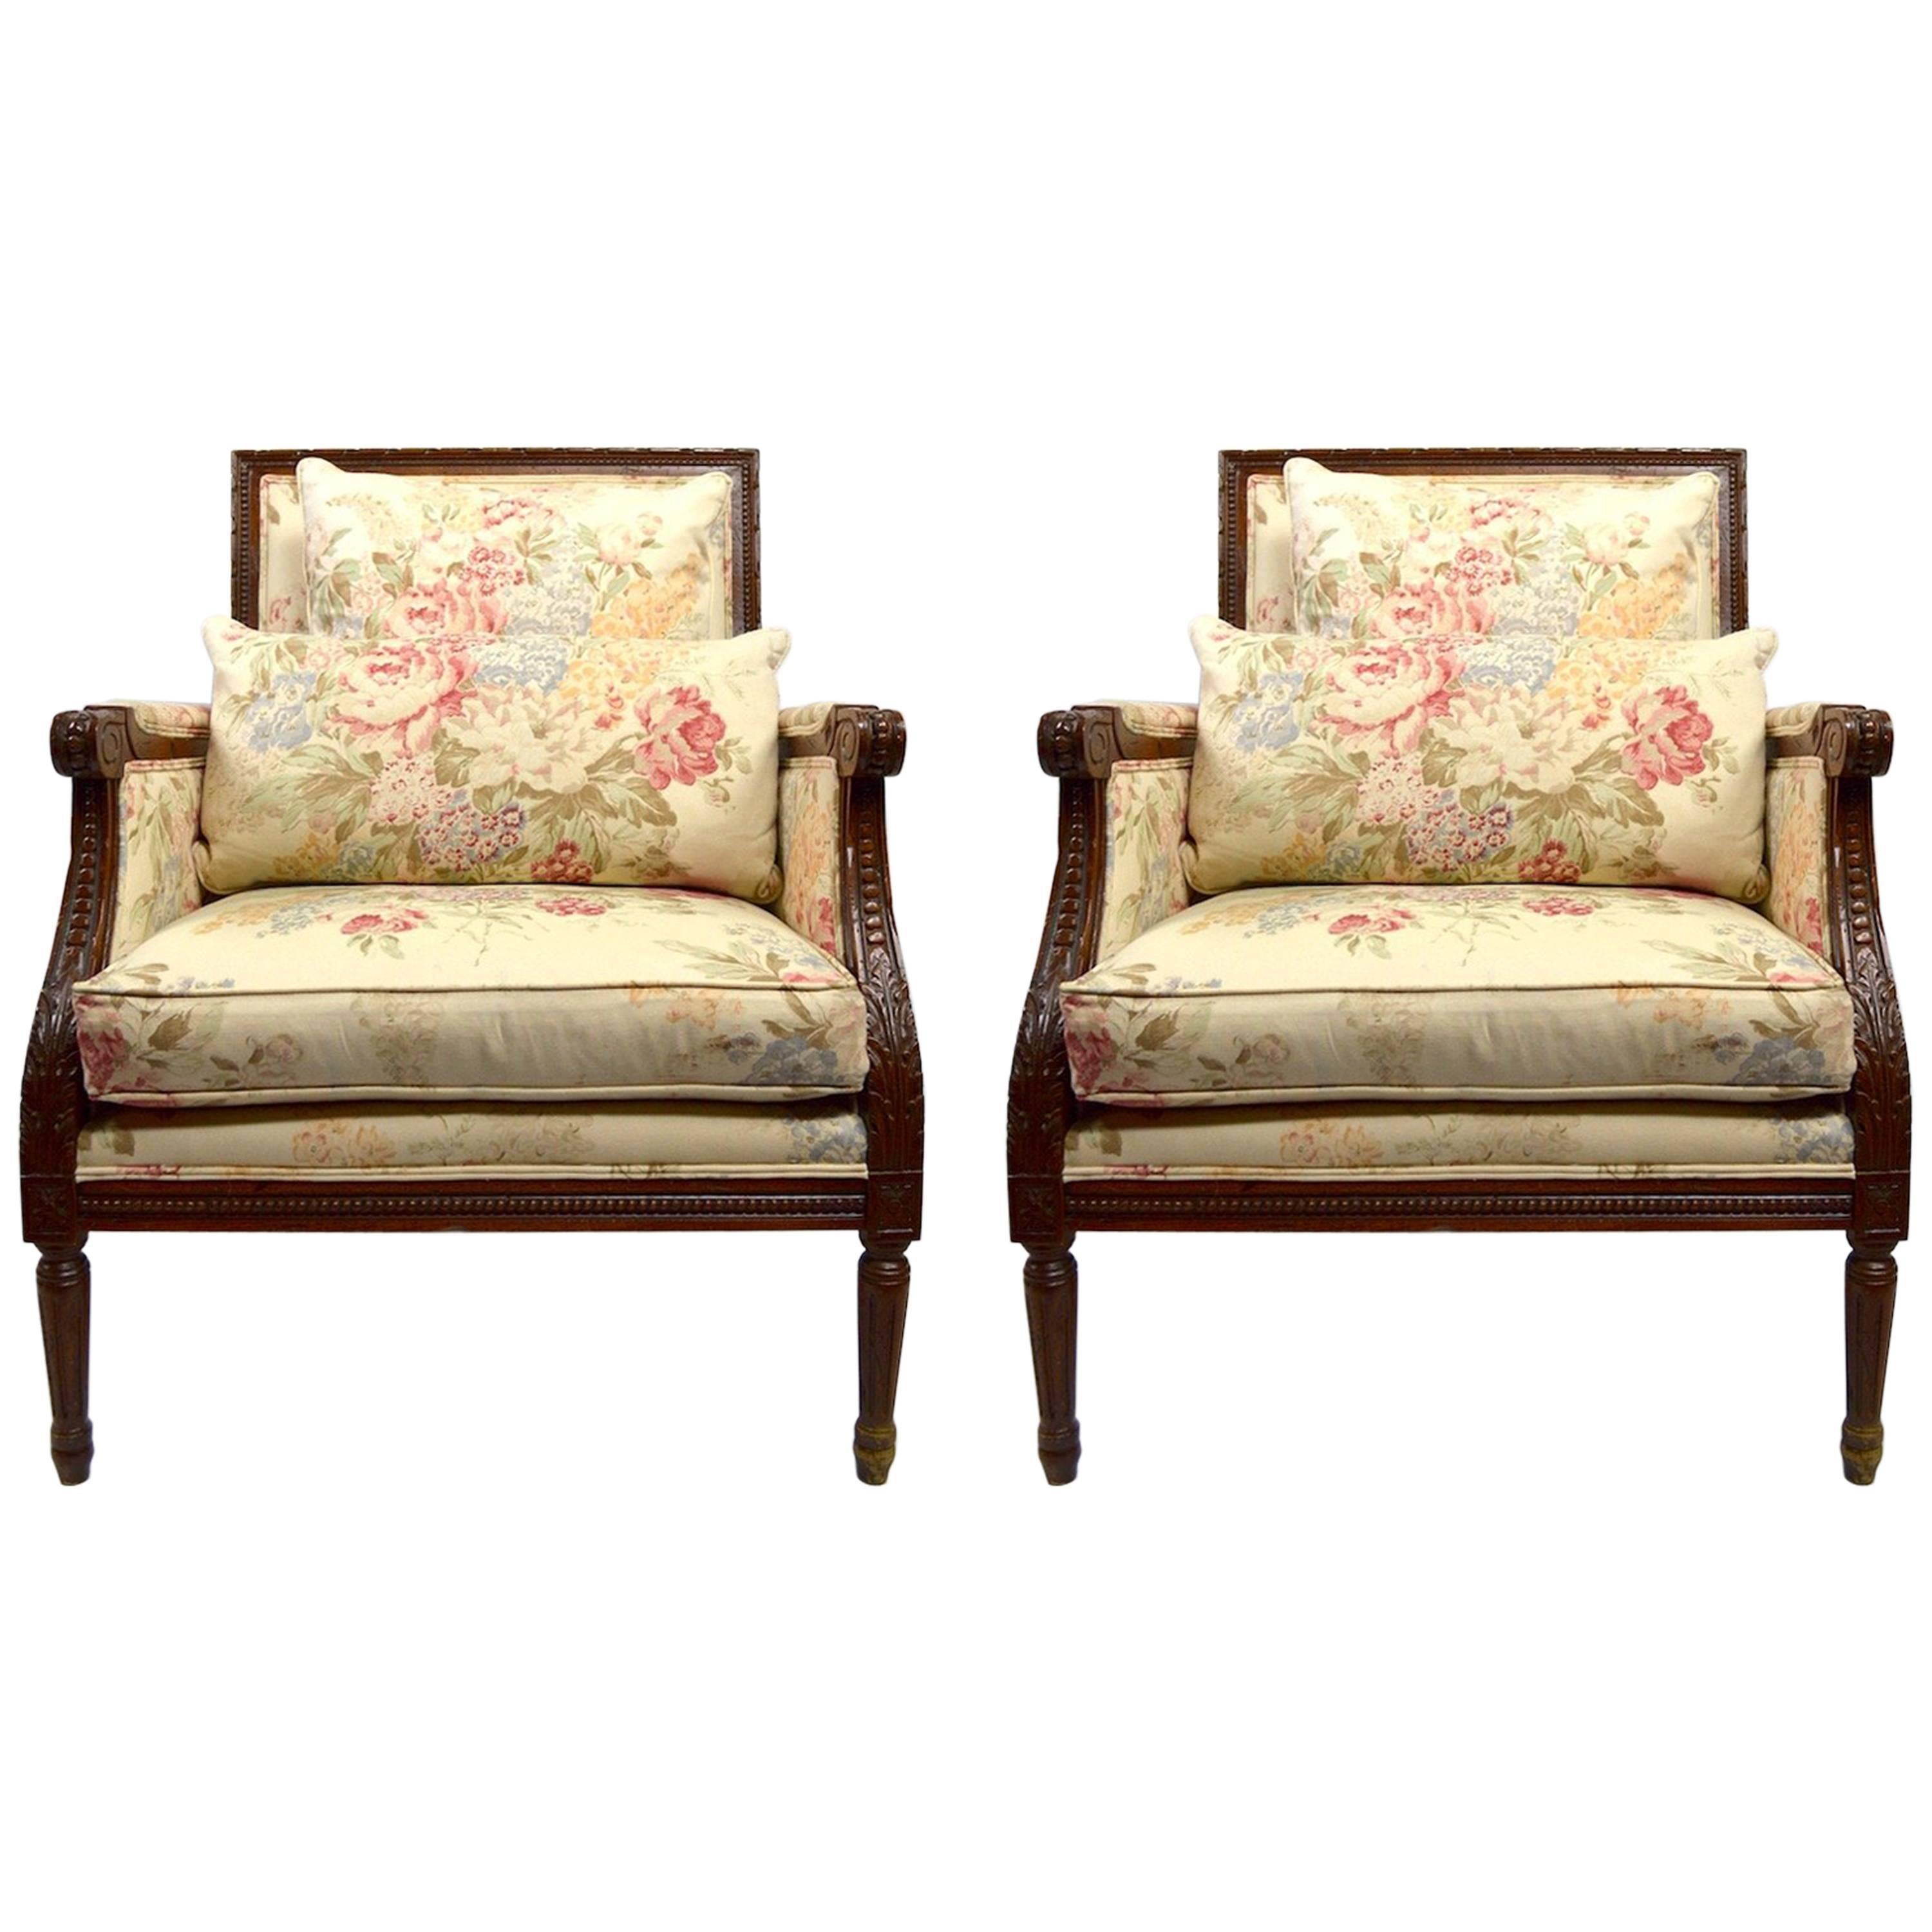 Pair of Louis XVI Style Bergere Armchairs by Ralph Lauren for Henredon